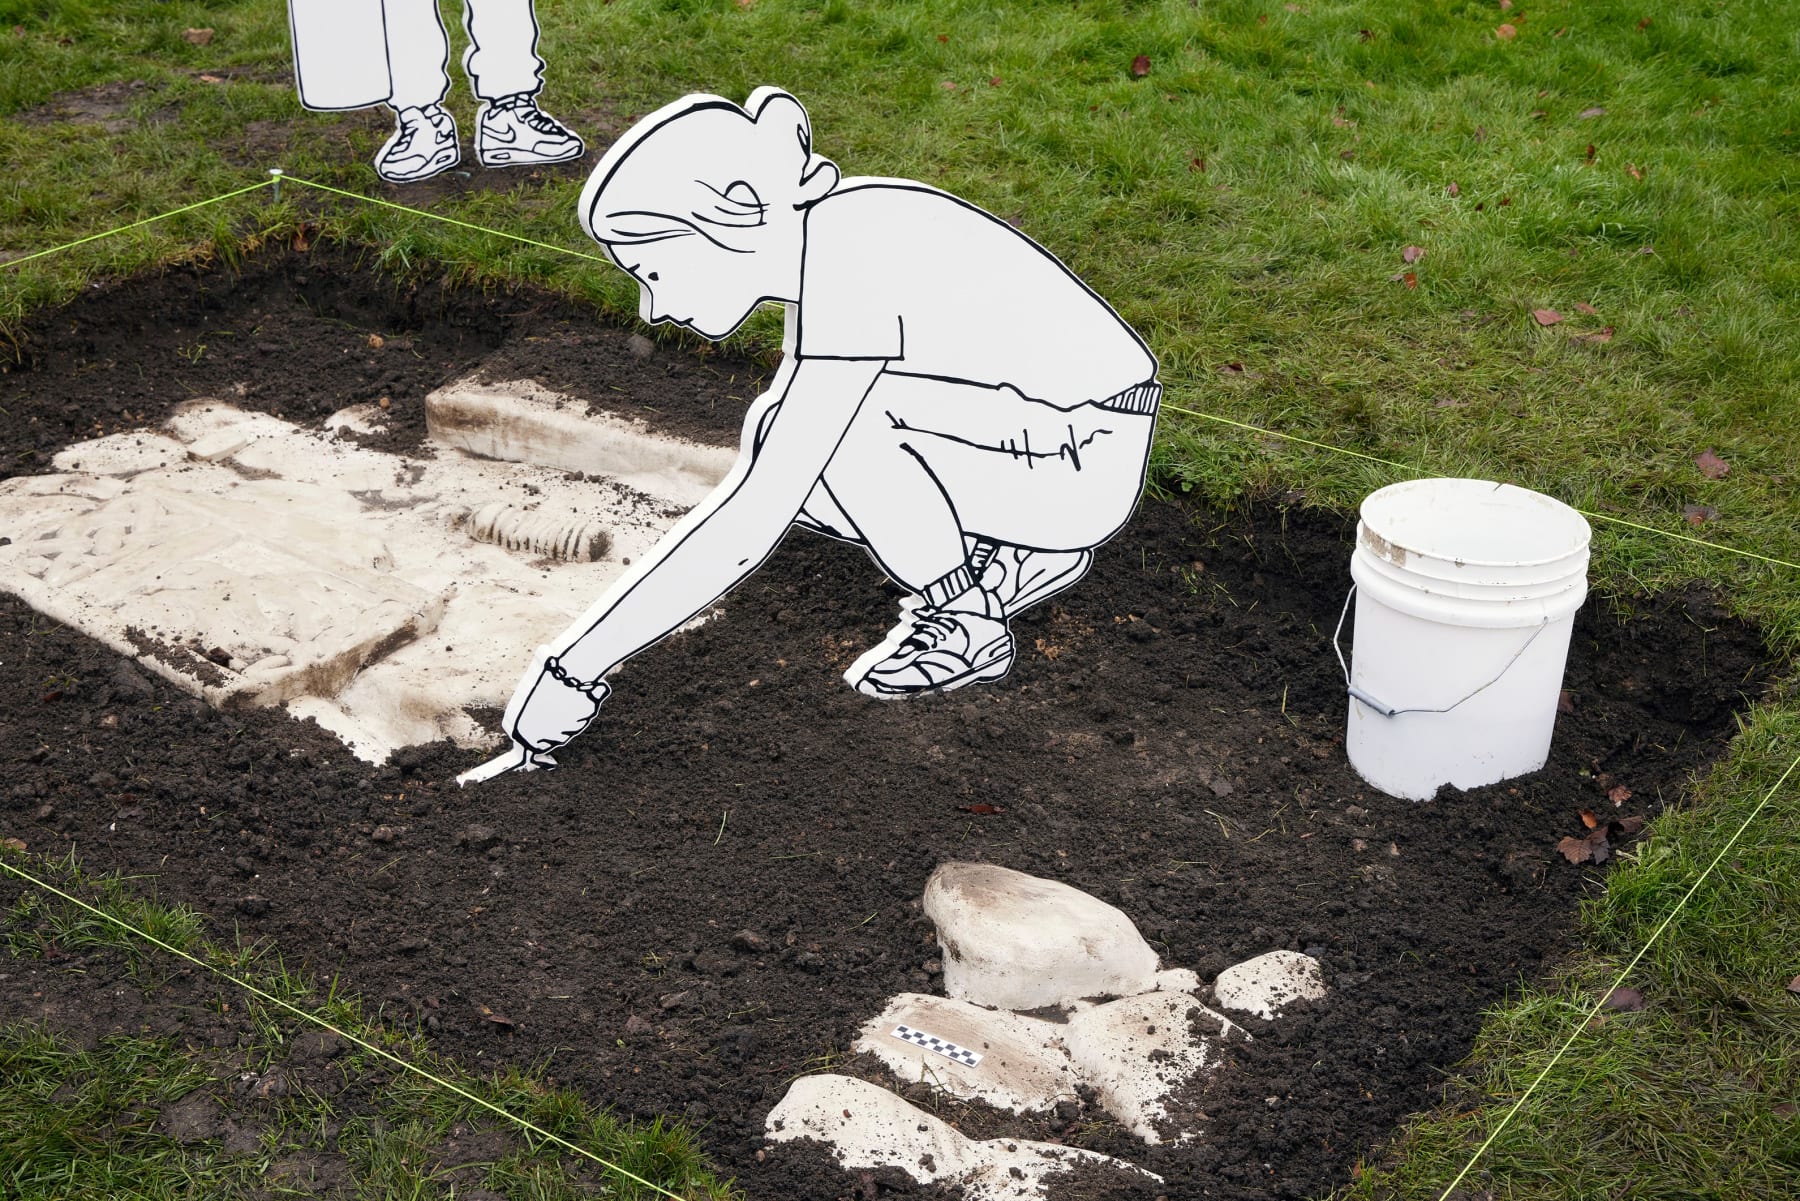 Mick Peter, Old Ghosts (archeological dig), 2022